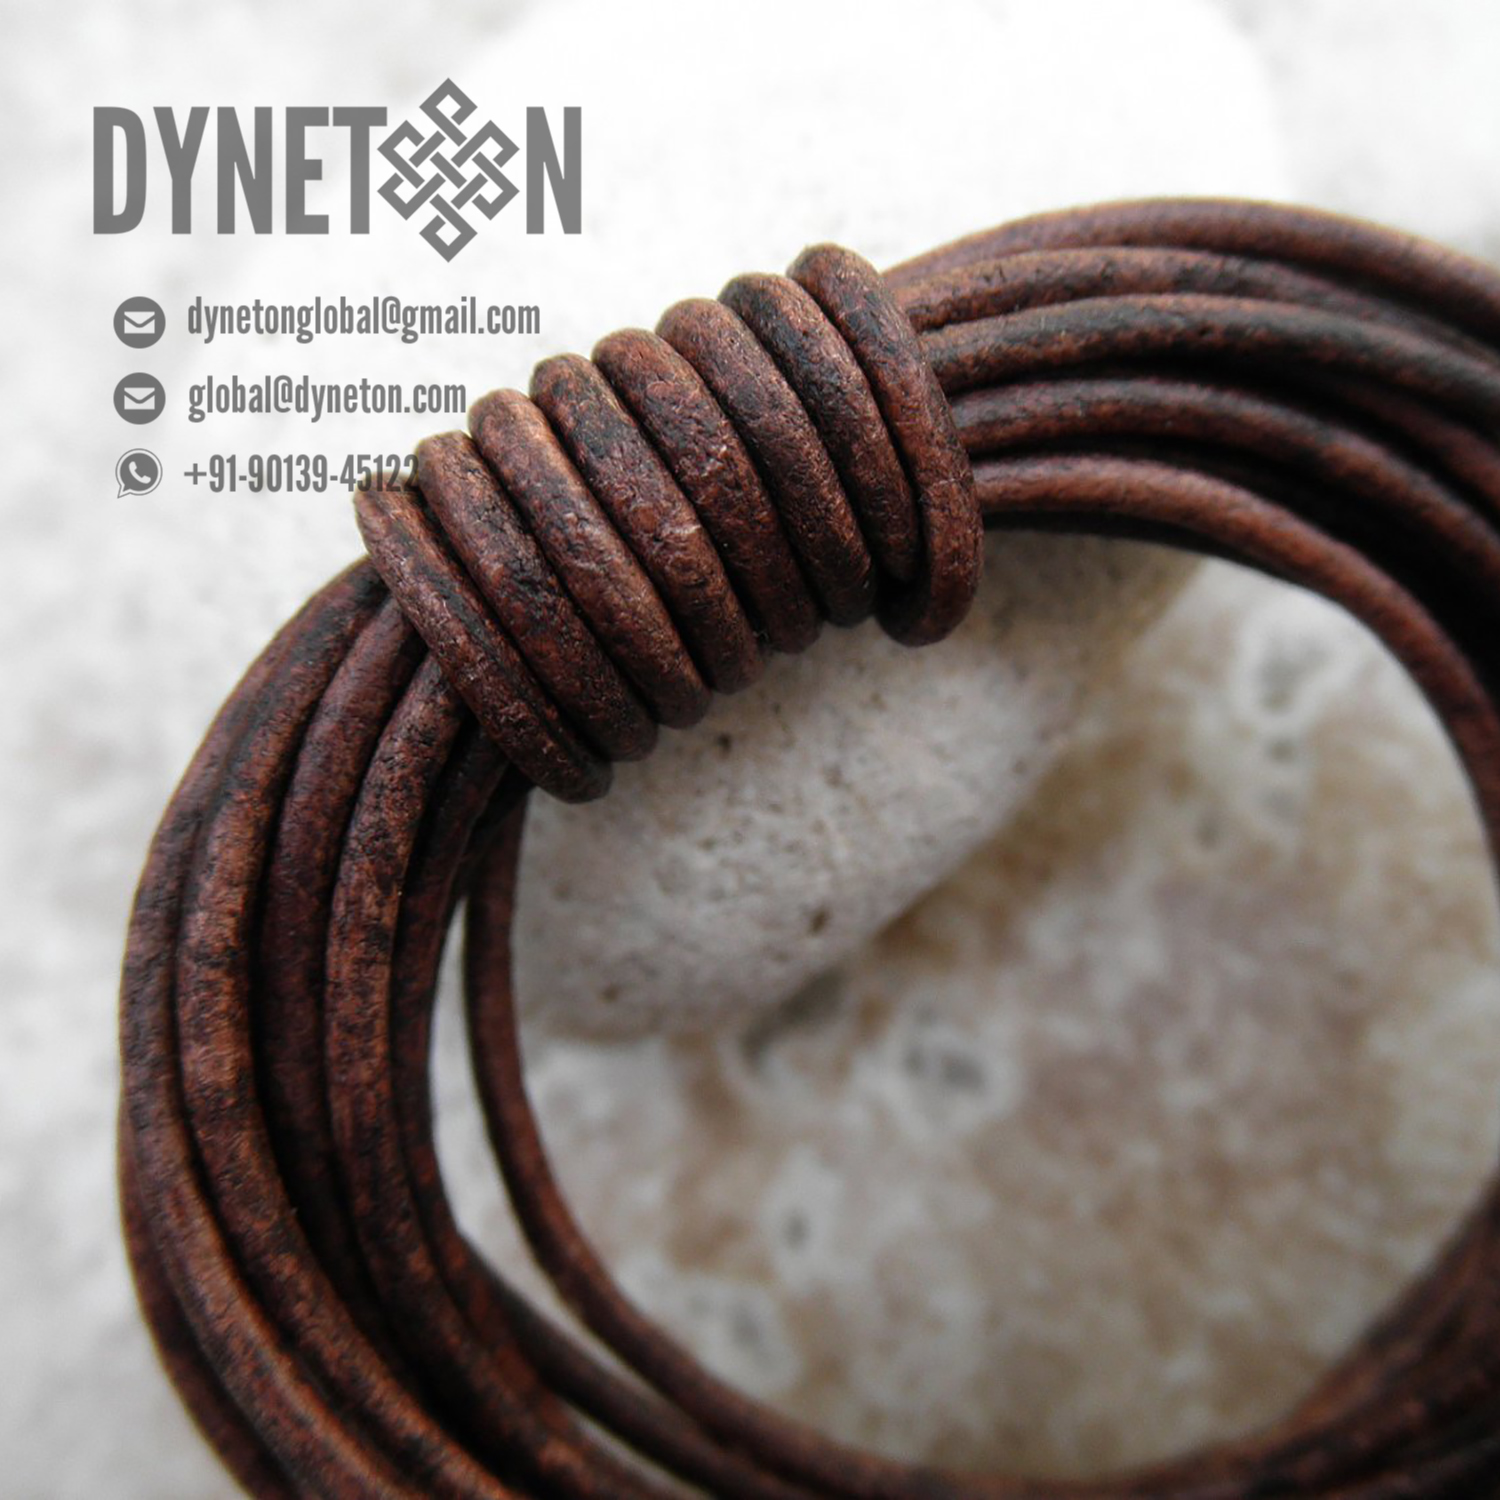 7mm Round Leather Cord - DYNETON / Round Leather Cords 7 mm